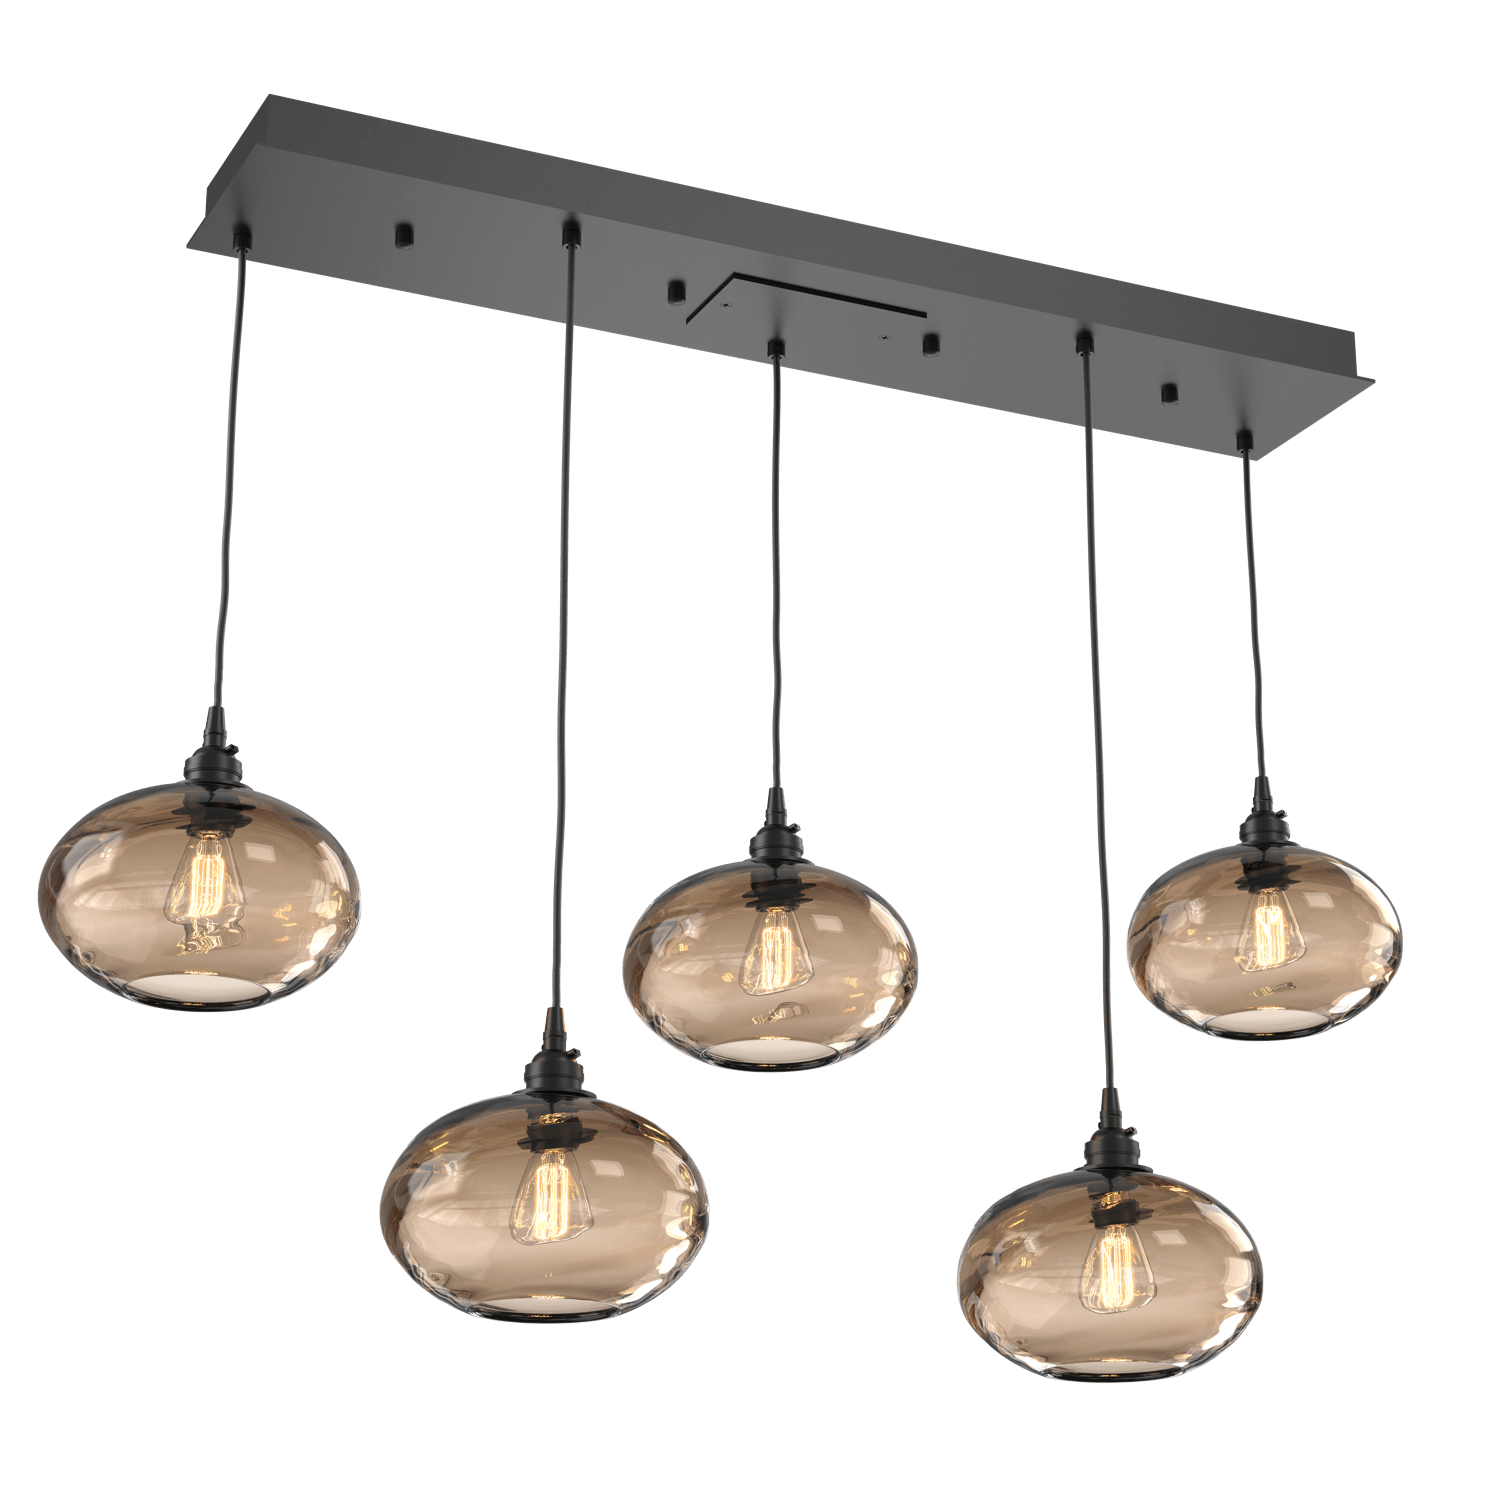 PLB0036-05-MB-OB-Hammerton-Studio-Optic-Blown-Glass-Coppa-5-light-linear-pendant-chandelier-with-matte-black-finish-and-optic-bronze-blown-glass-shades-and-incandescent-lamping